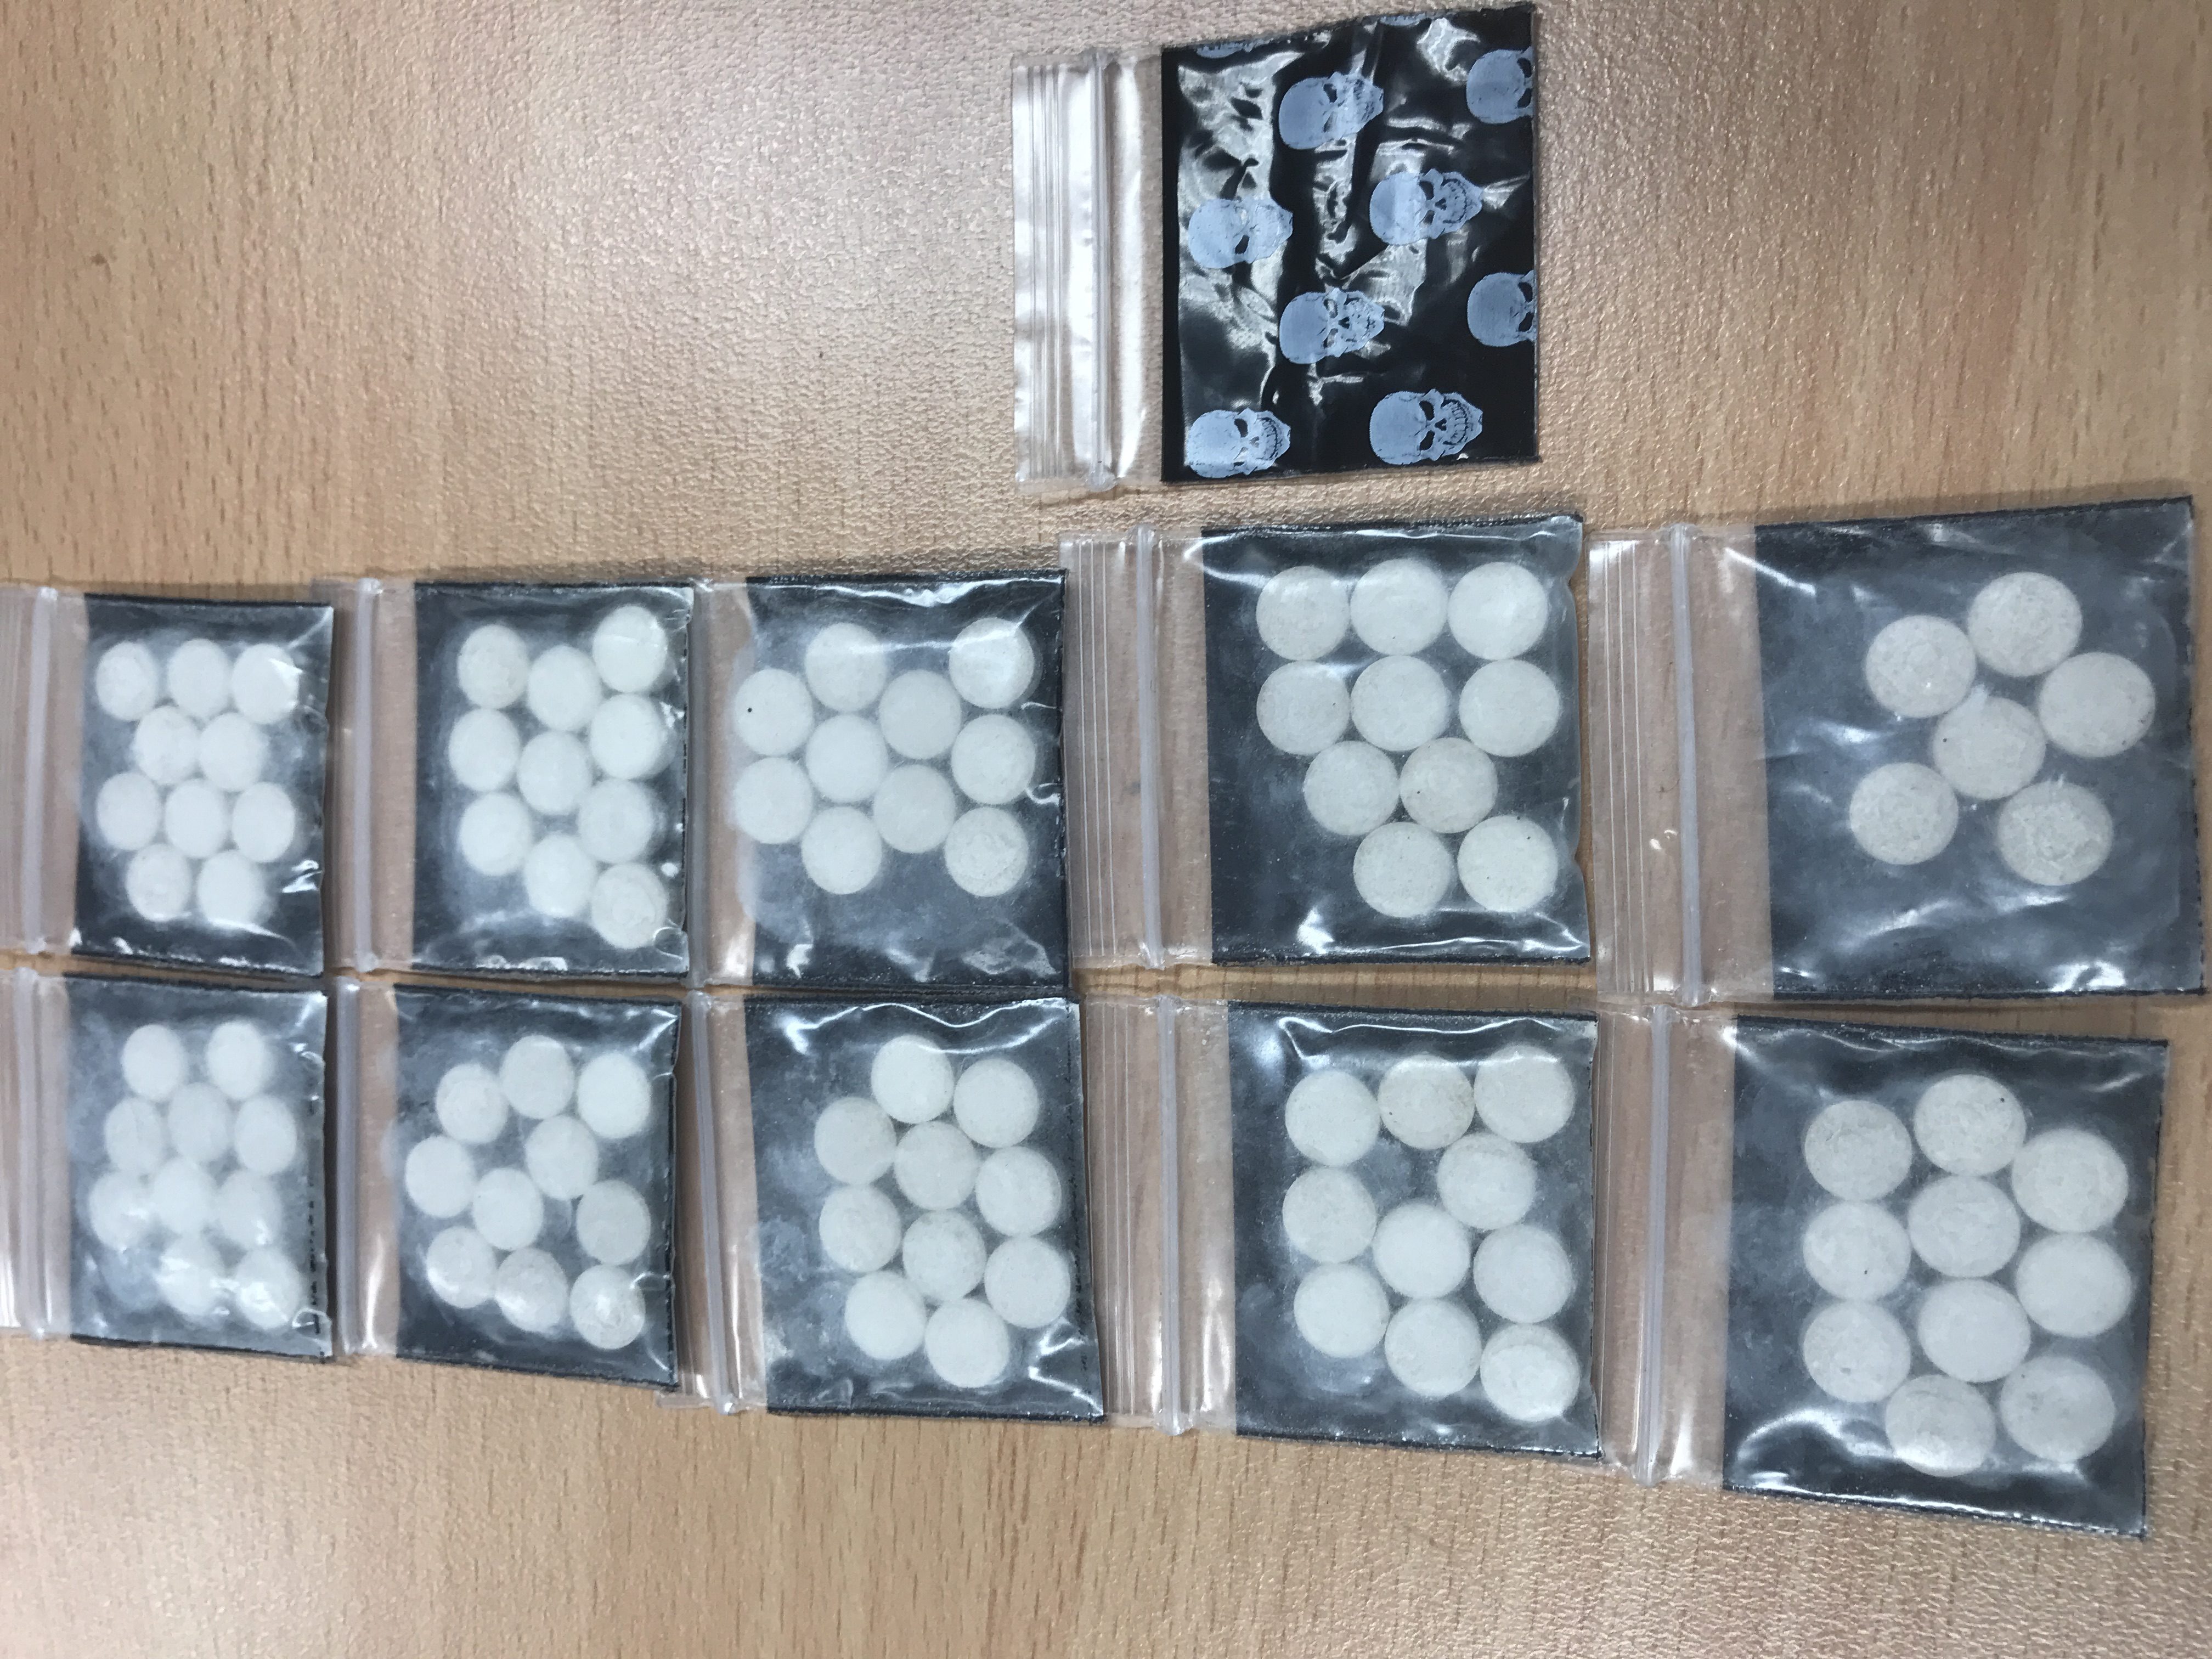 Police seize MDMA and cash after intercepting drug deal in city centre